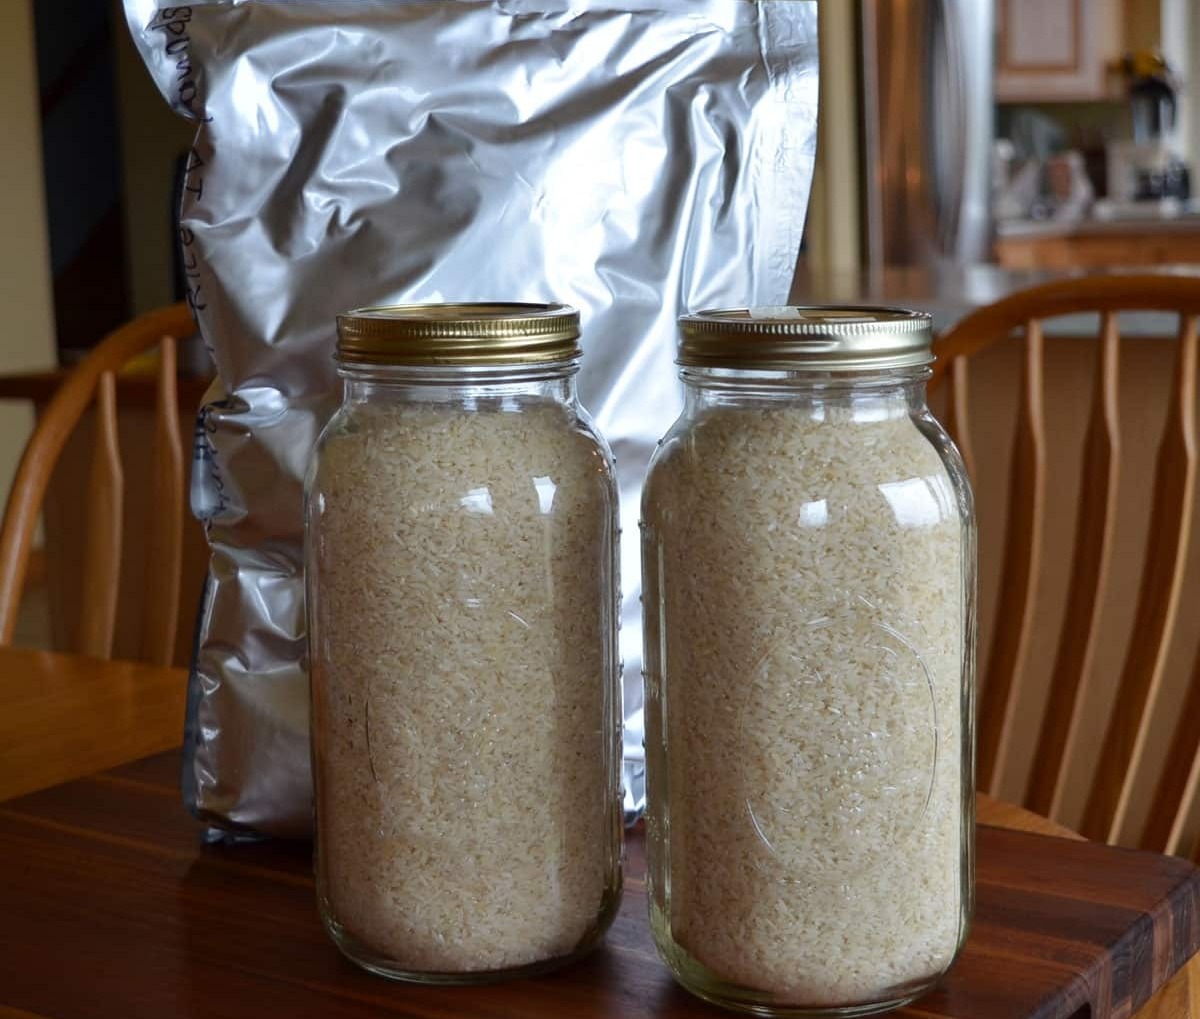 How To Store Rice In Mason Jars